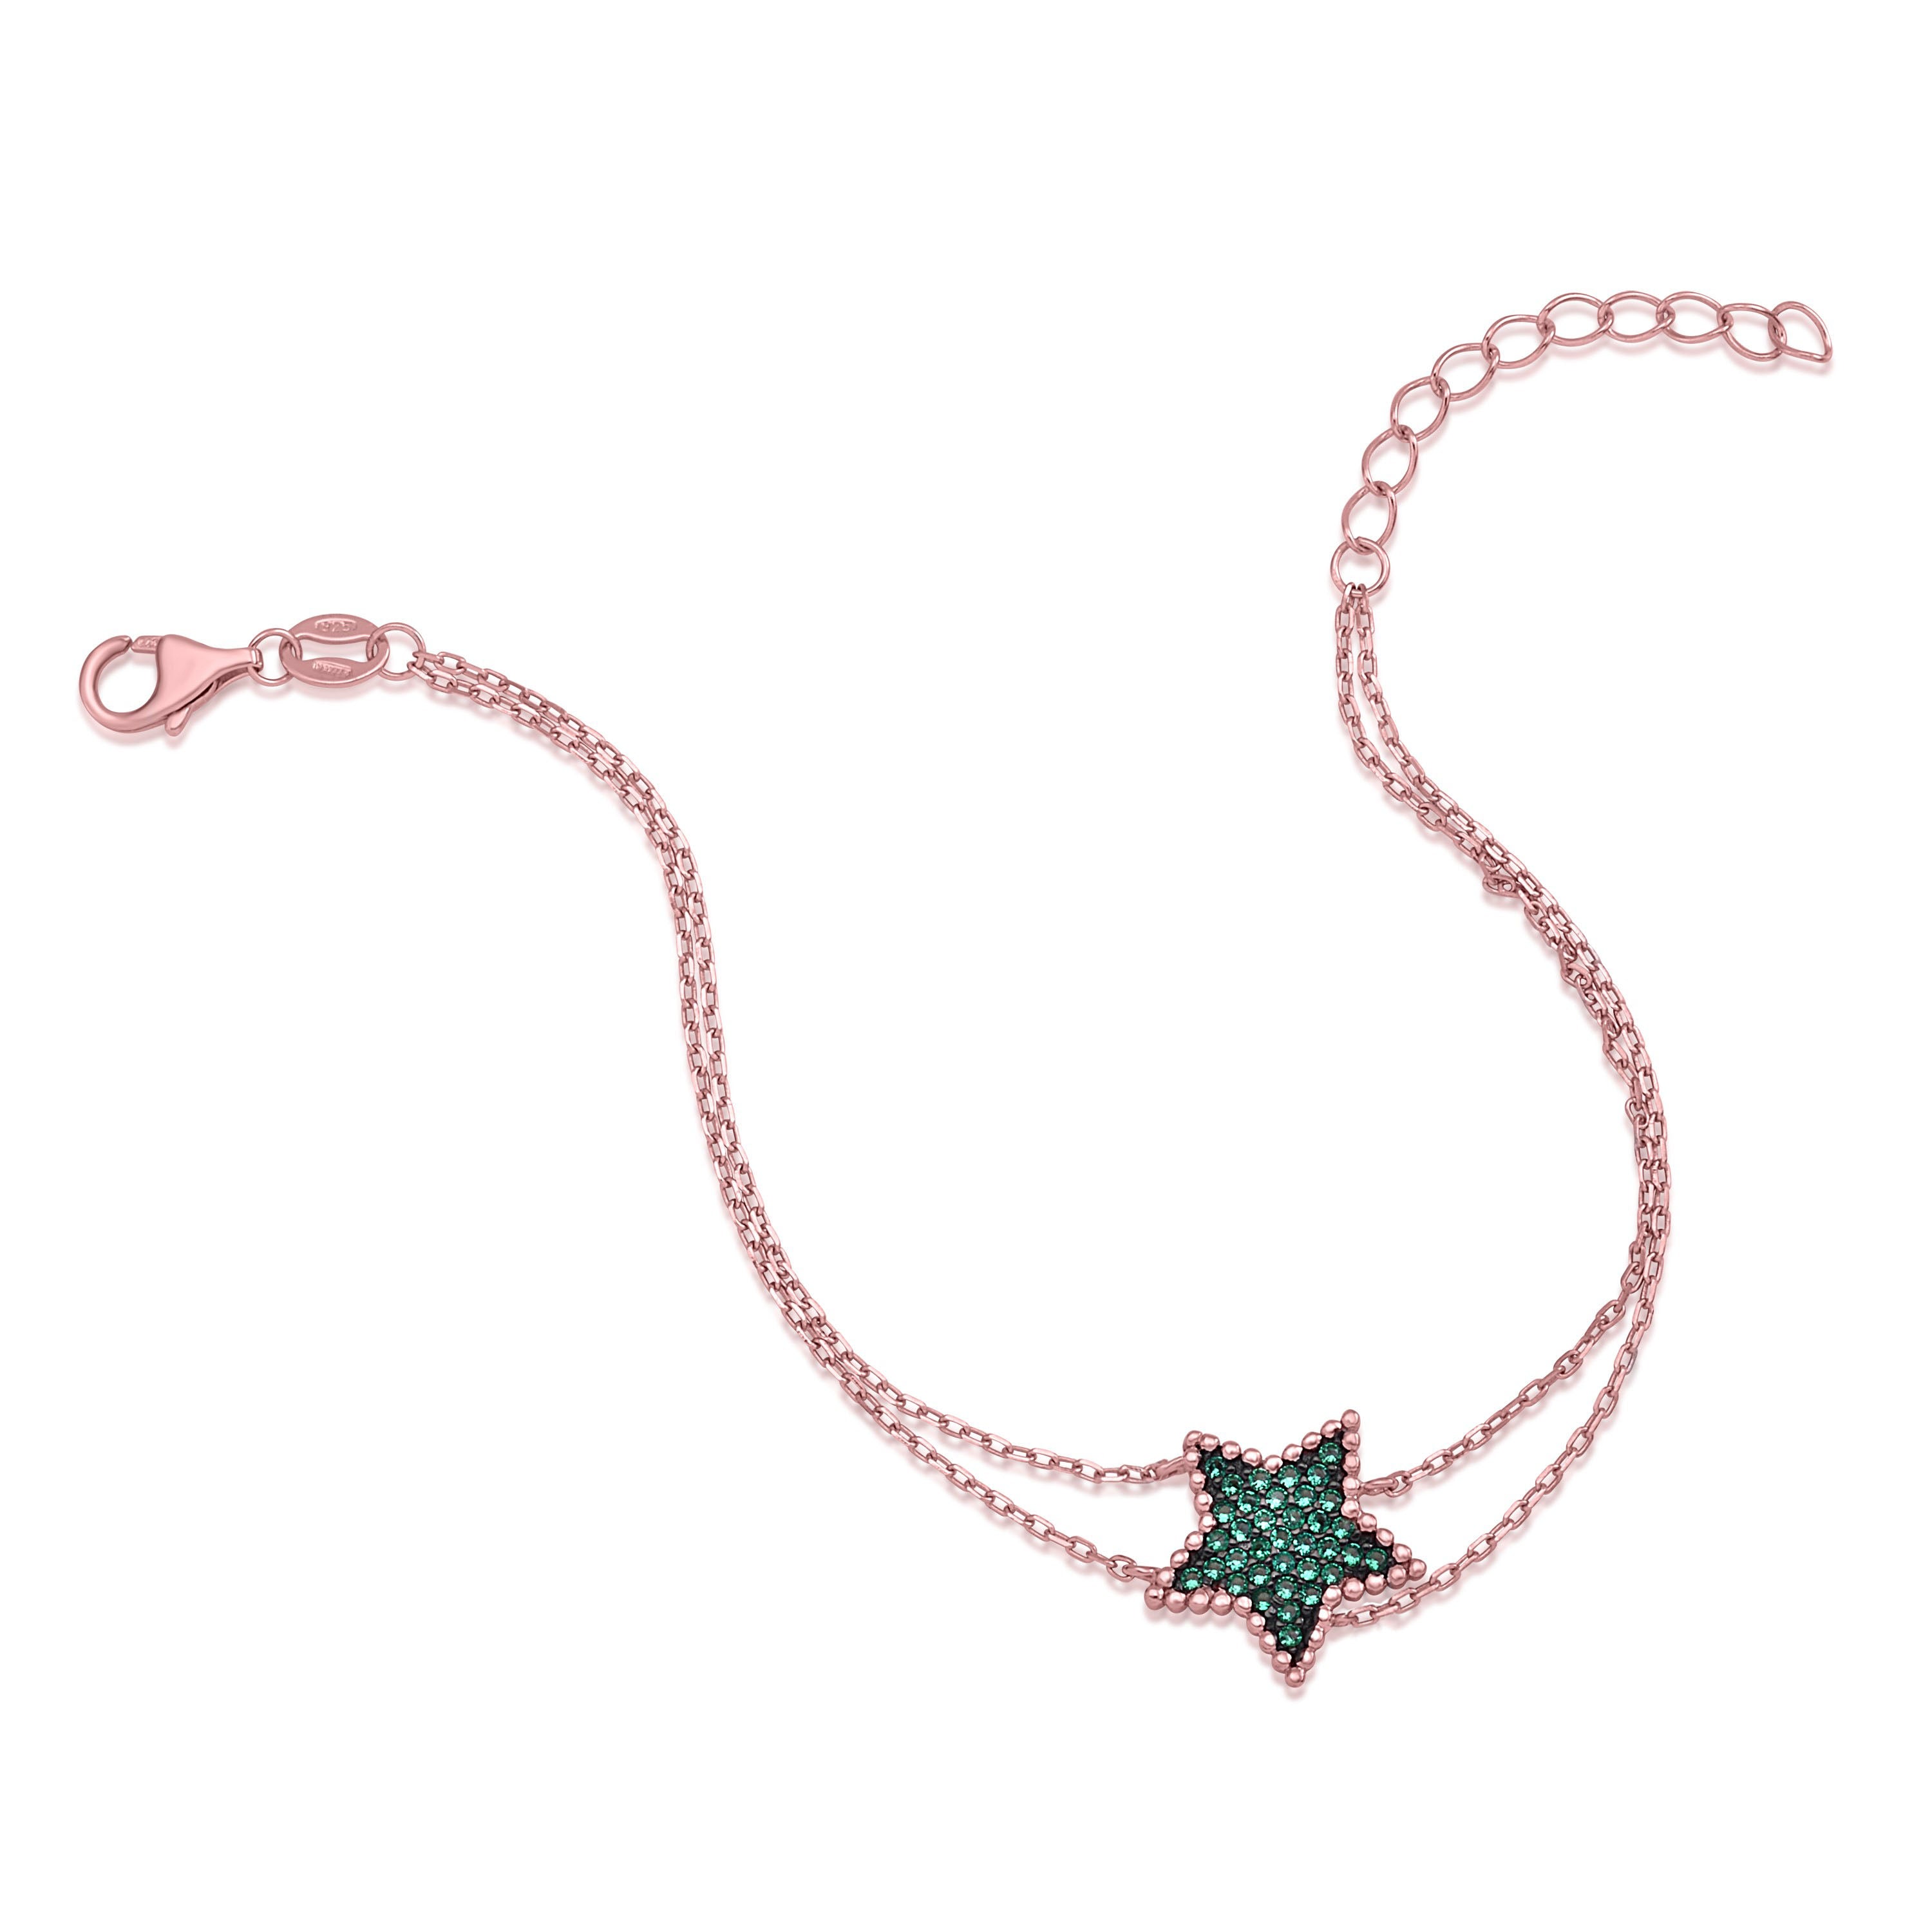 MASSETE Sterling Silver 925 Rose Gold Plated Star Beaded Pave CZ Bracelet Double Cable Chain 7"